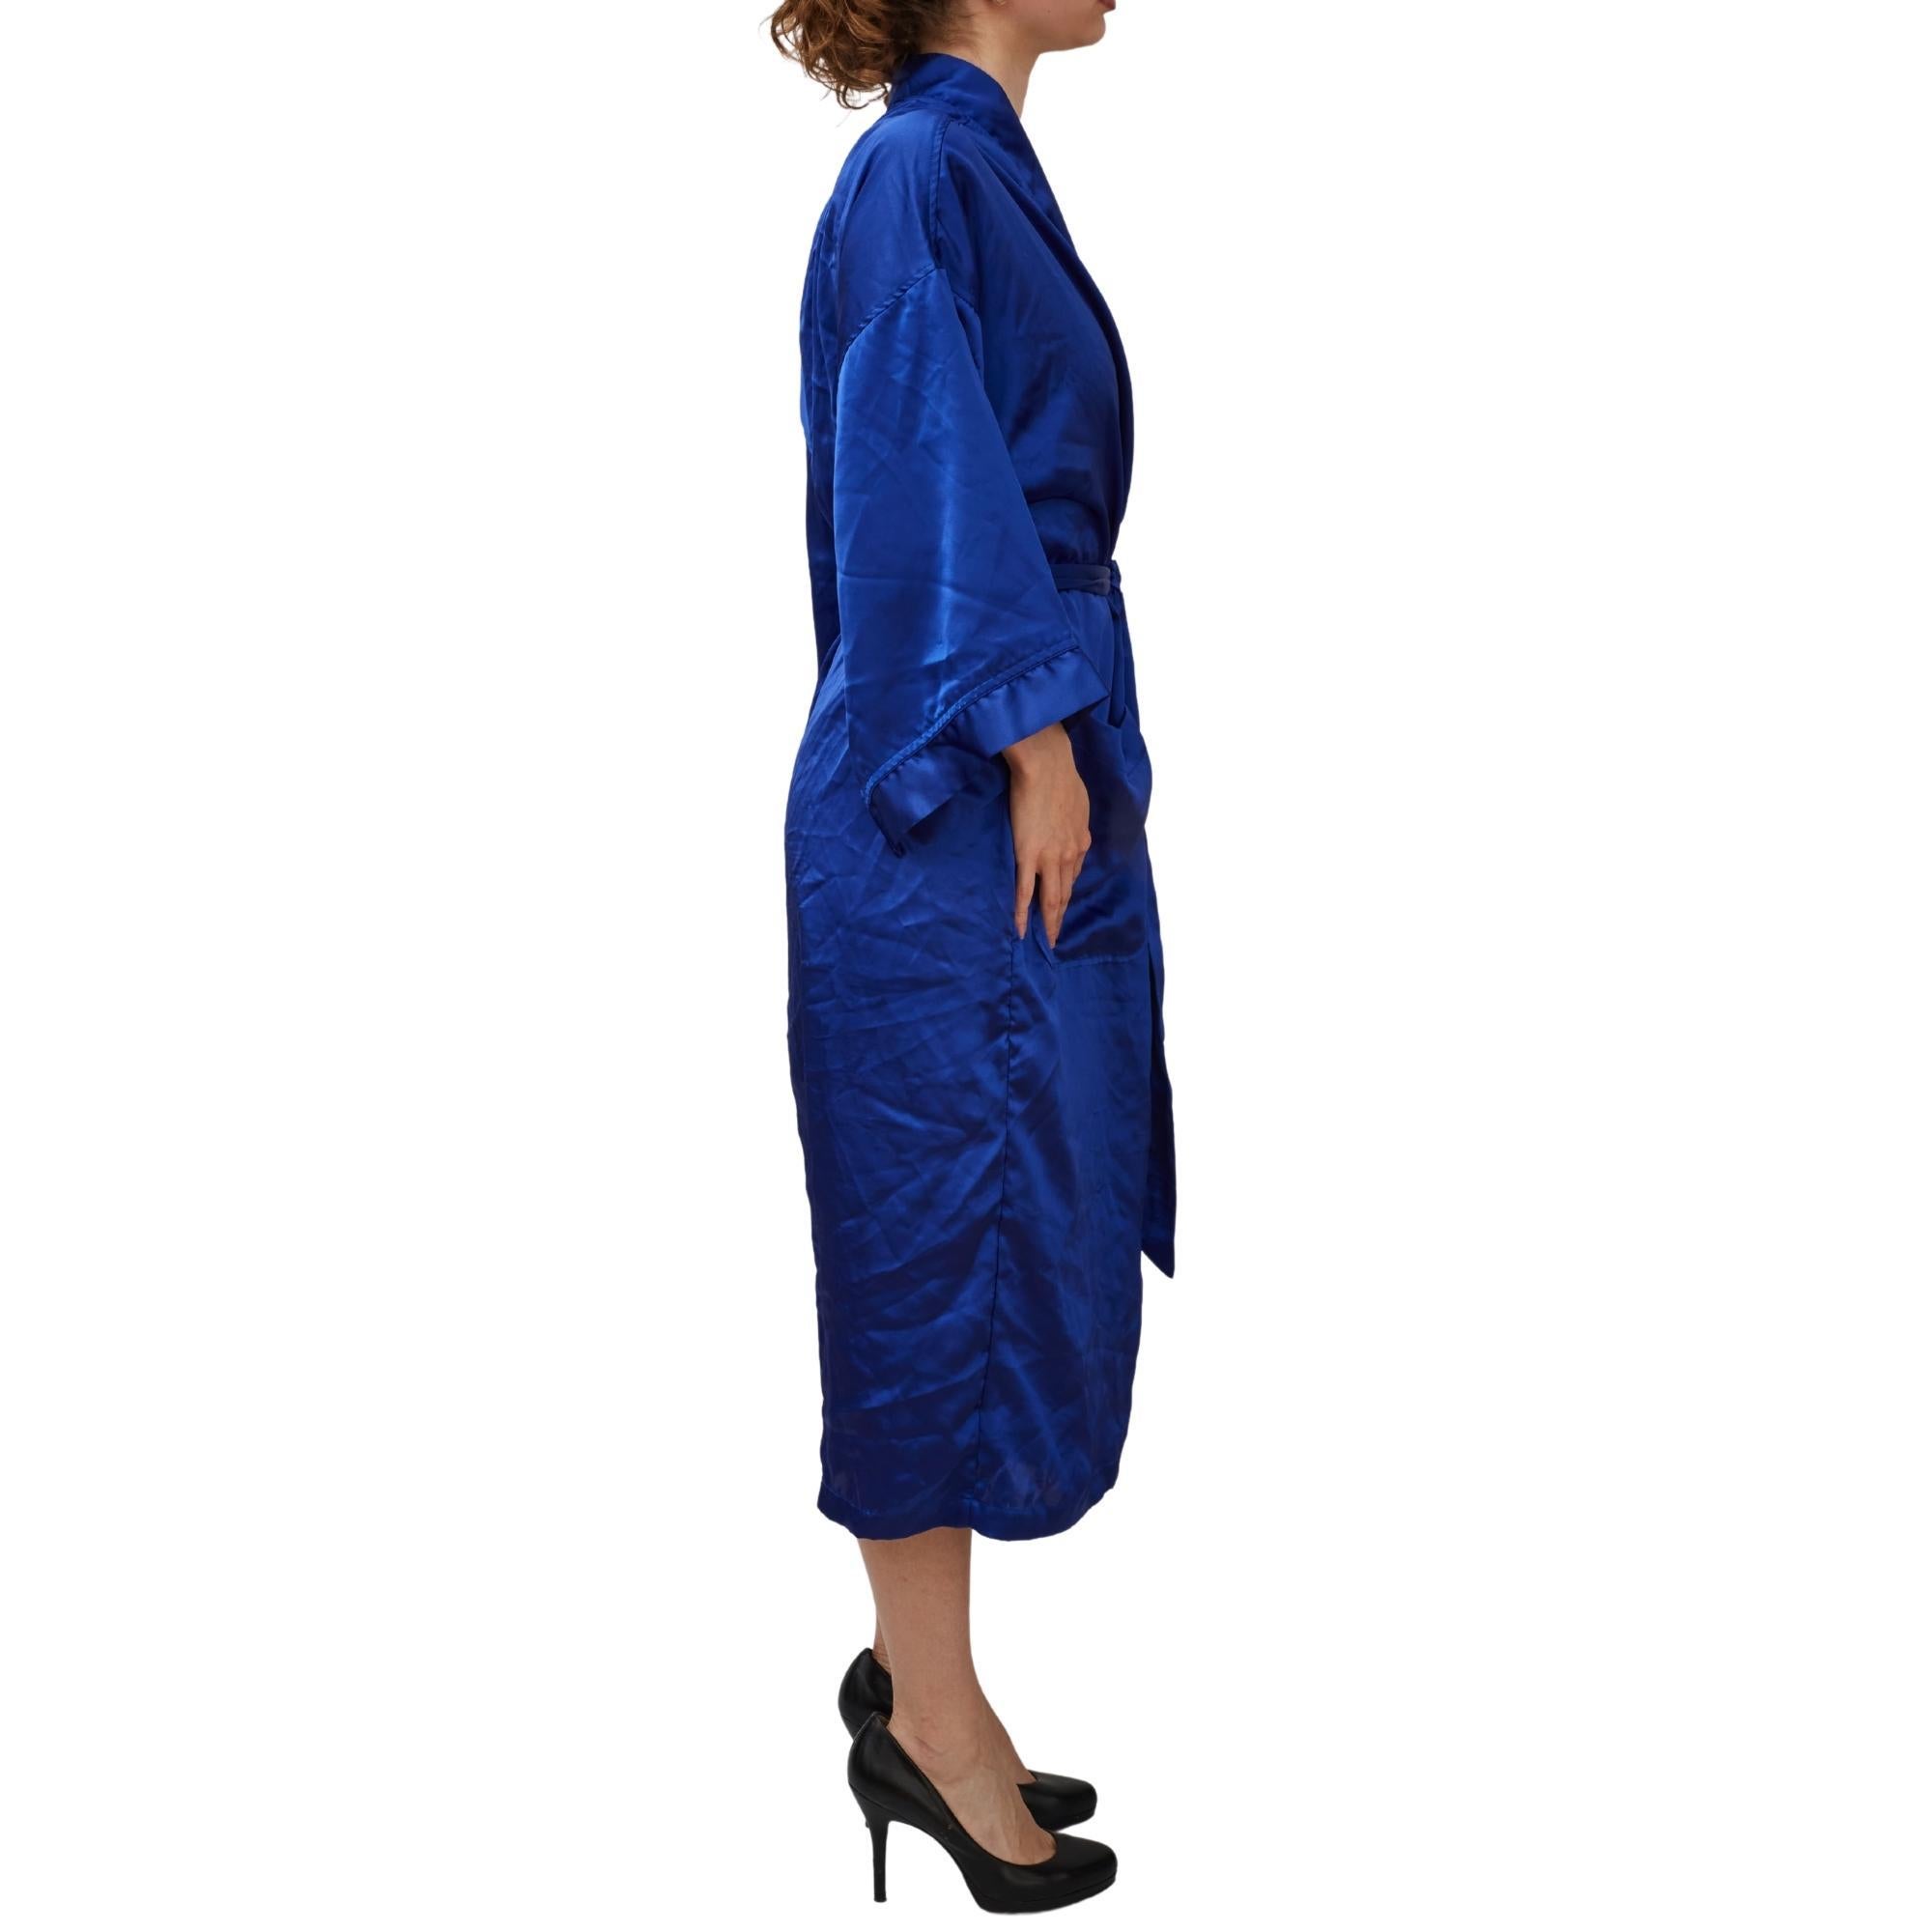 Dior blue silk bathrobe with sash-tie closure at front.

COLOR: Blue
MATERIAL: Polyester

SIZE: One sise 

CONDITION: Good - minimal sings of wear.

Made in China